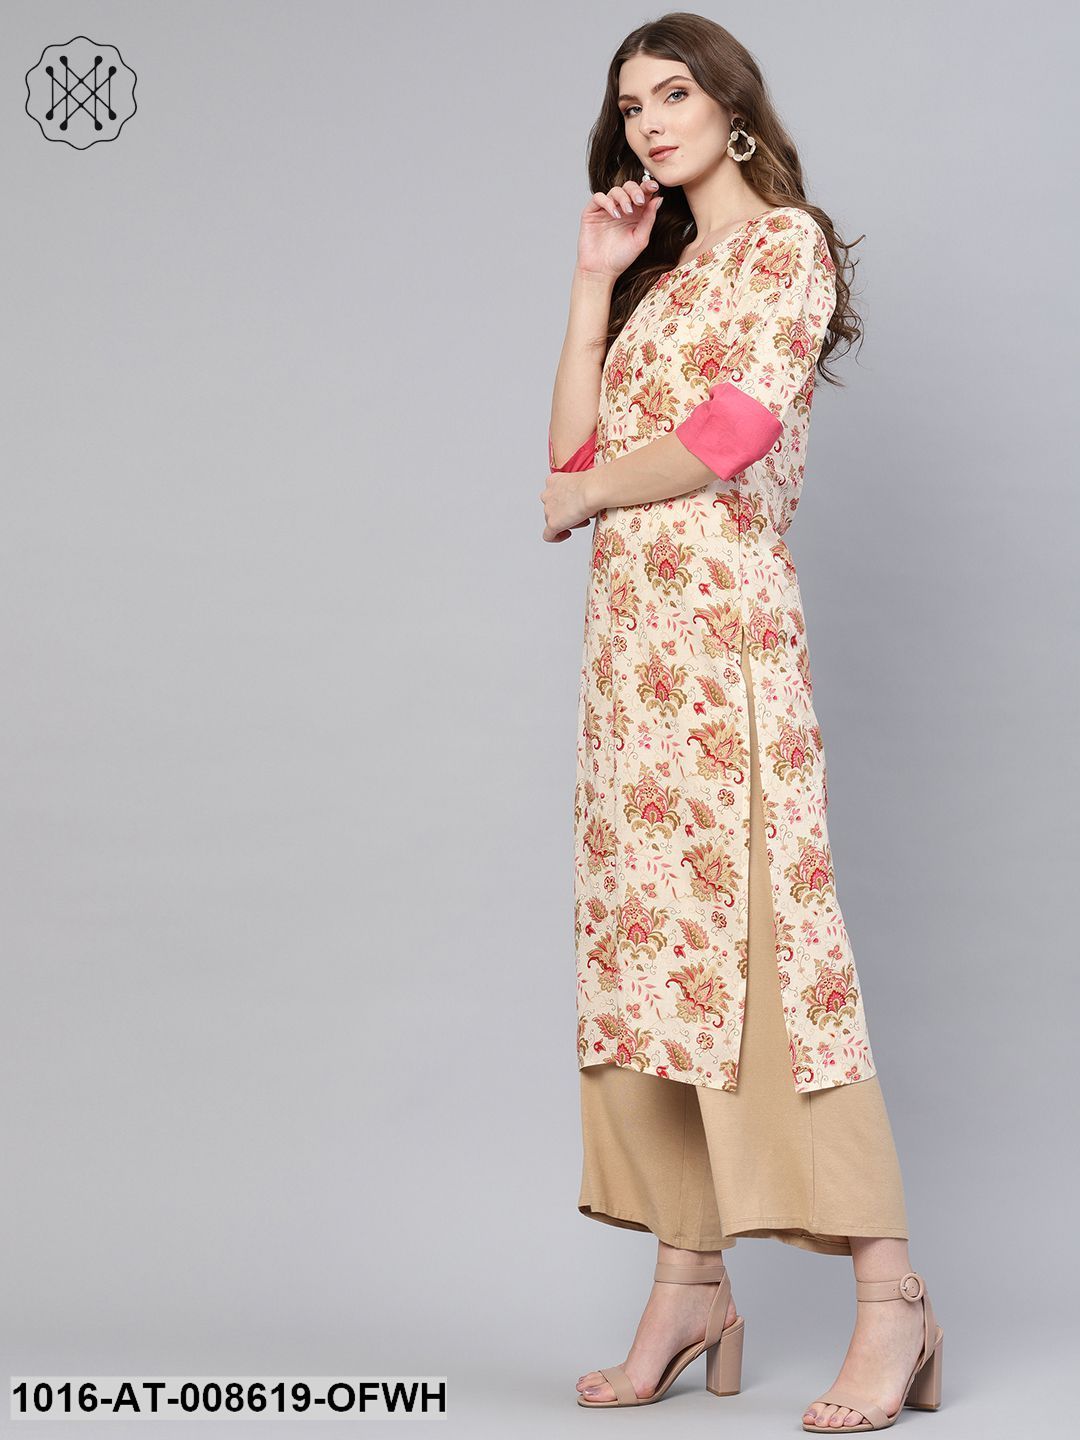 Off -White & Pink Floral Printed Straight Kurta With Round Neck & 3/4 Sleeves With Solid Cuff